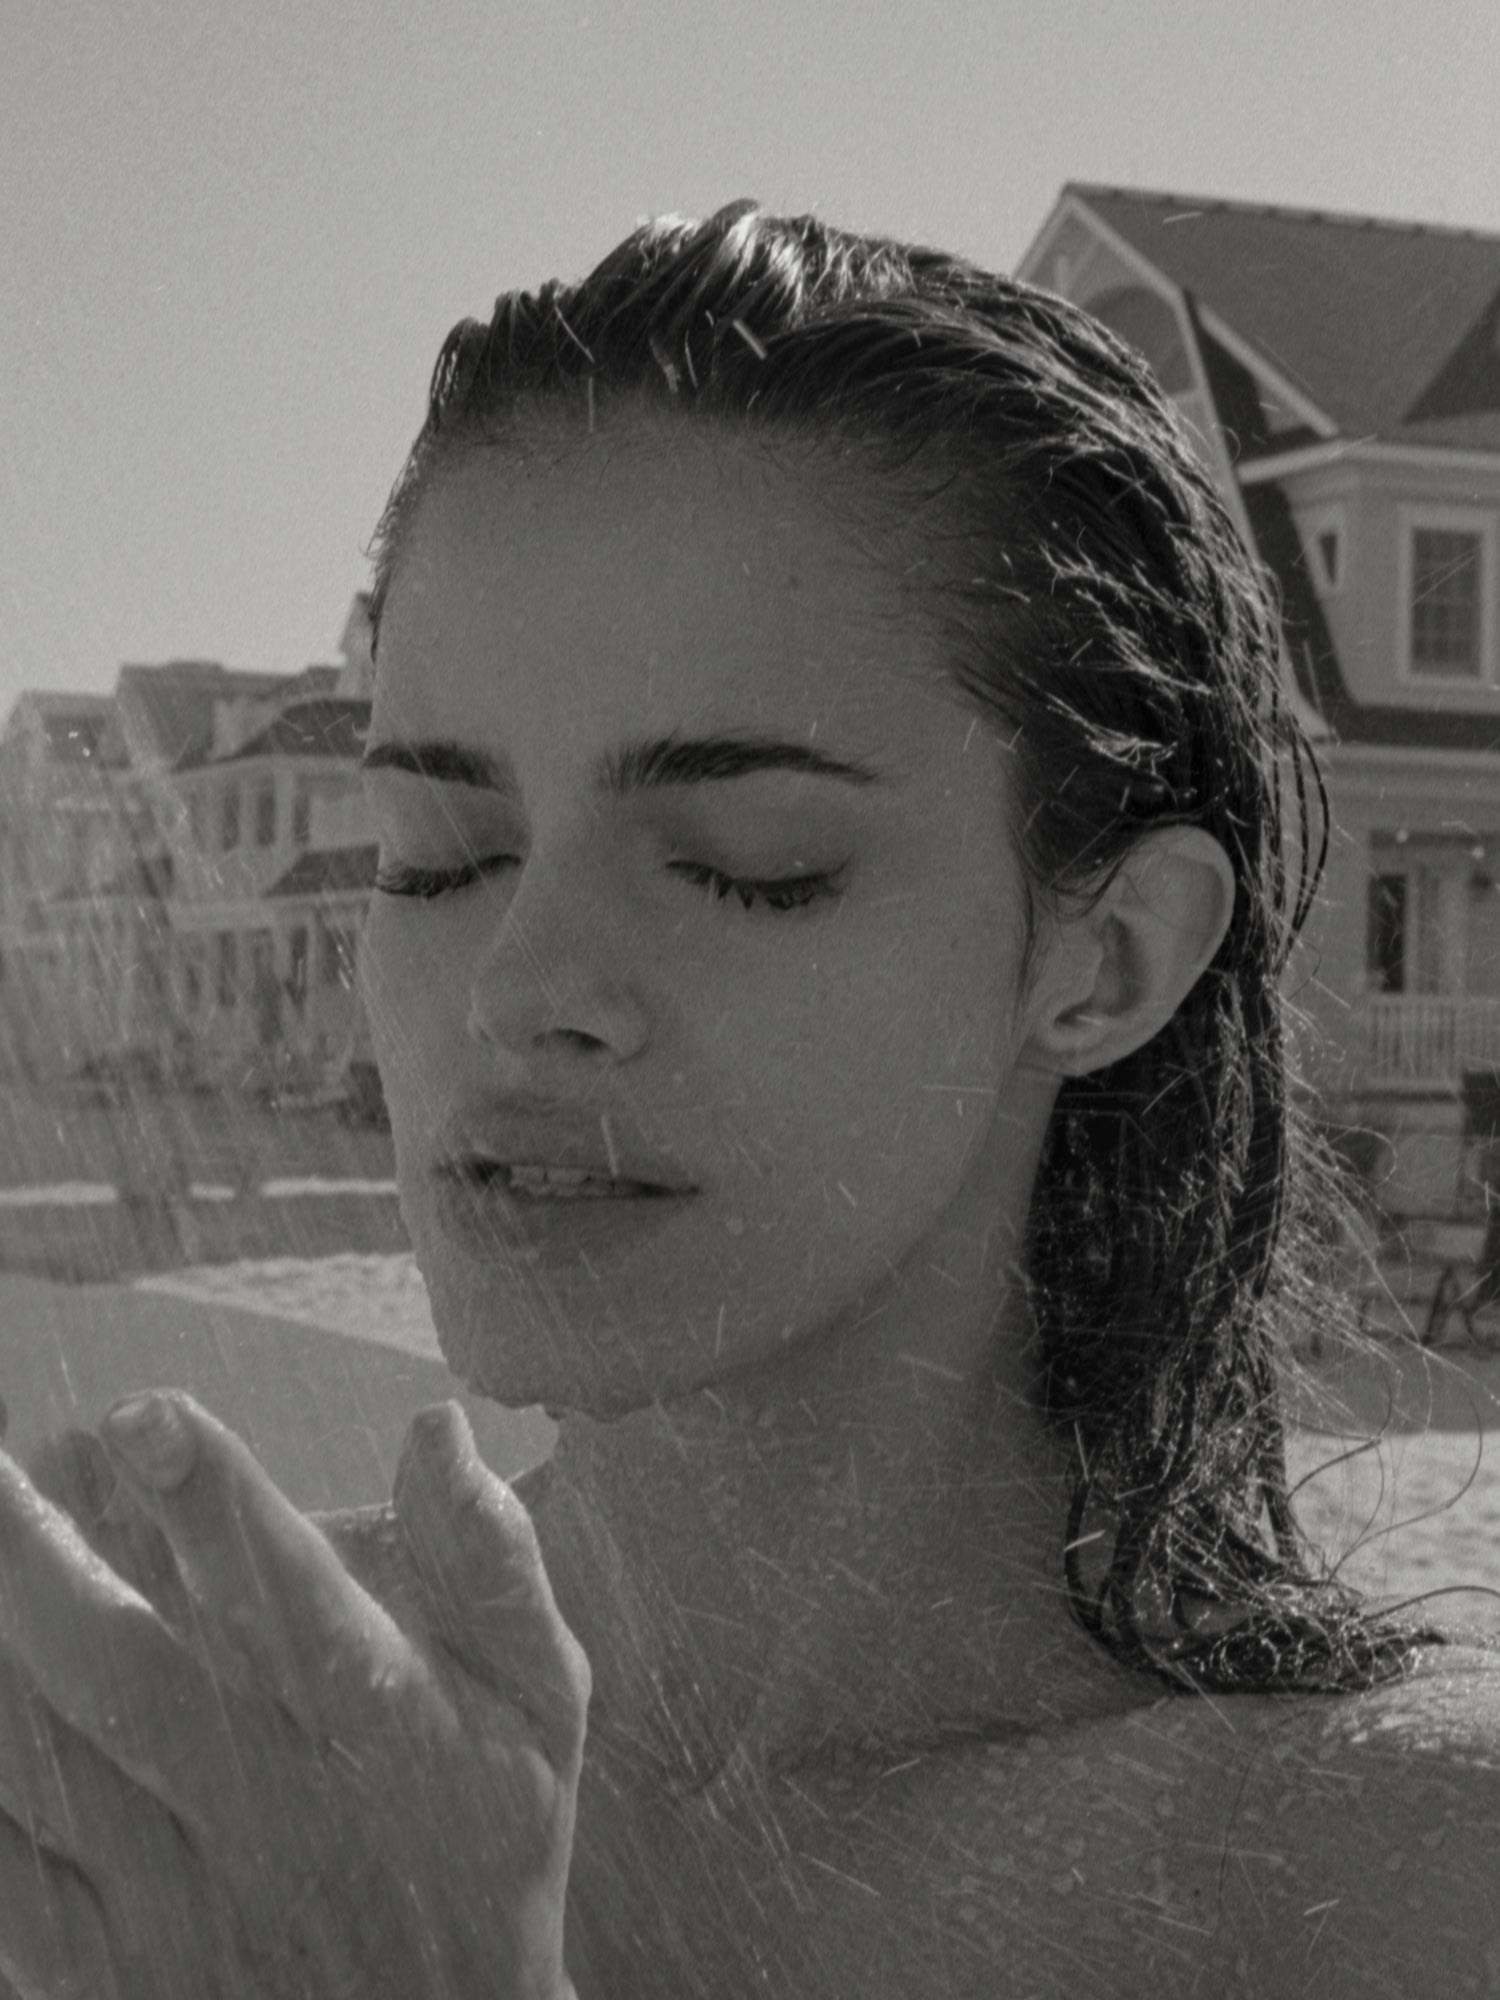 Black and white photo of female model Carmin Valencia on a New Jersey beach, her hair is wet, water droplets on her face and body, water splashing on her face, vacation houses in the background. Photographed by New York photographer Maria Bruun. Nikon film camera and Ilfordfilm. "High Tide" Fashion editorial for Nasty Magazine.